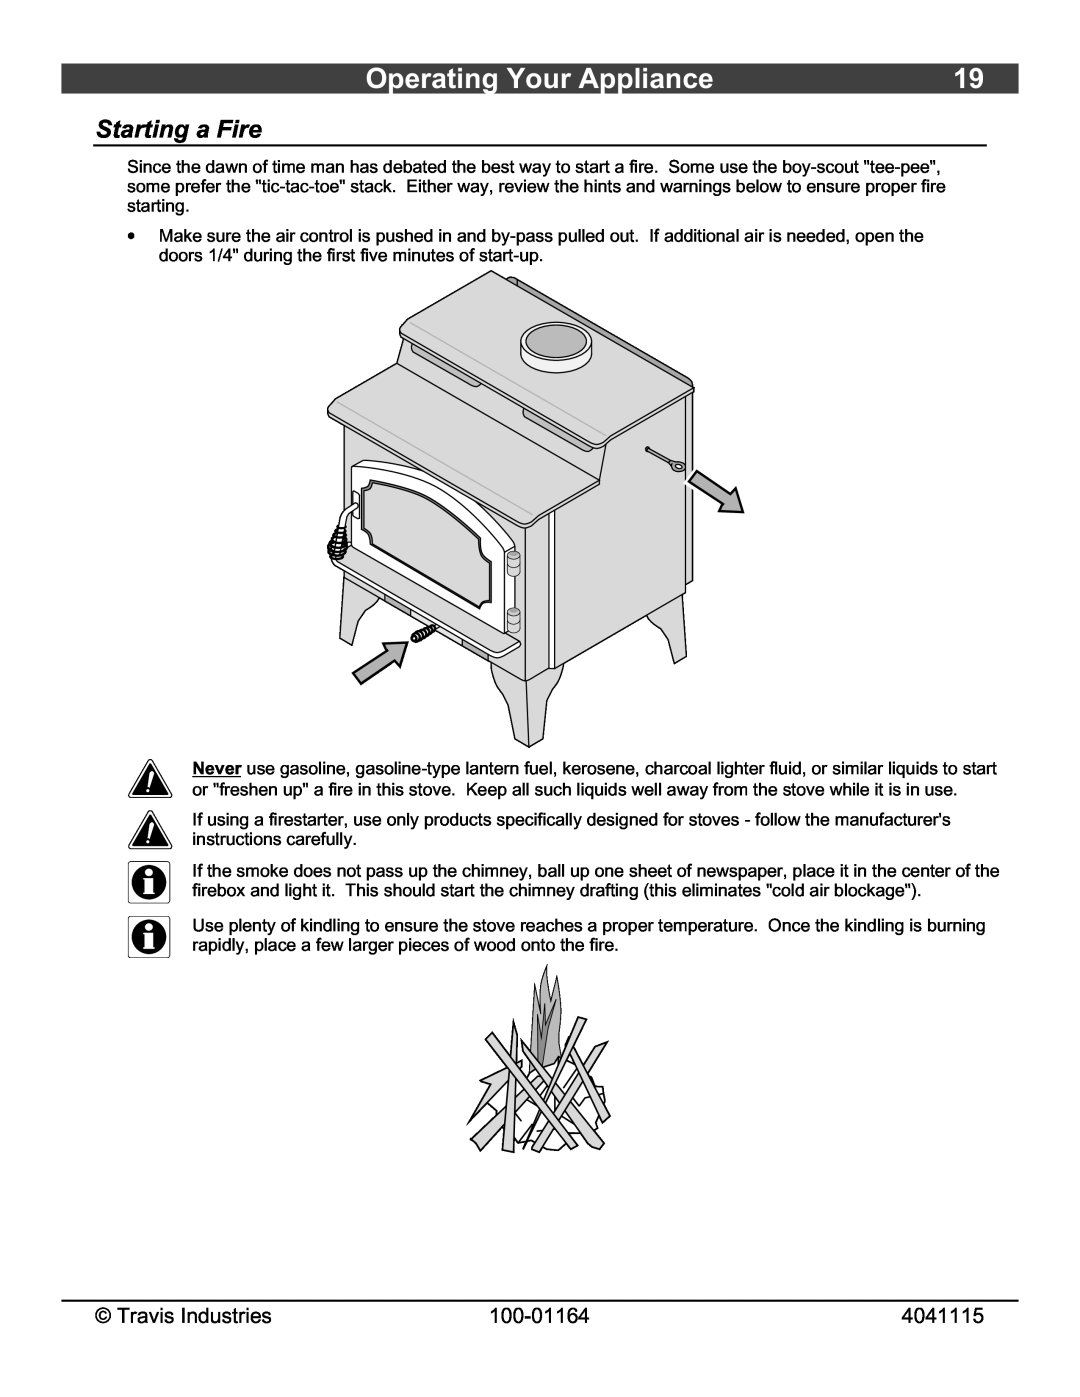 Lopi Liberty Wood Stove owner manual Operating Your Appliance, Starting a Fire, Travis Industries, 100-01164, 4041115 